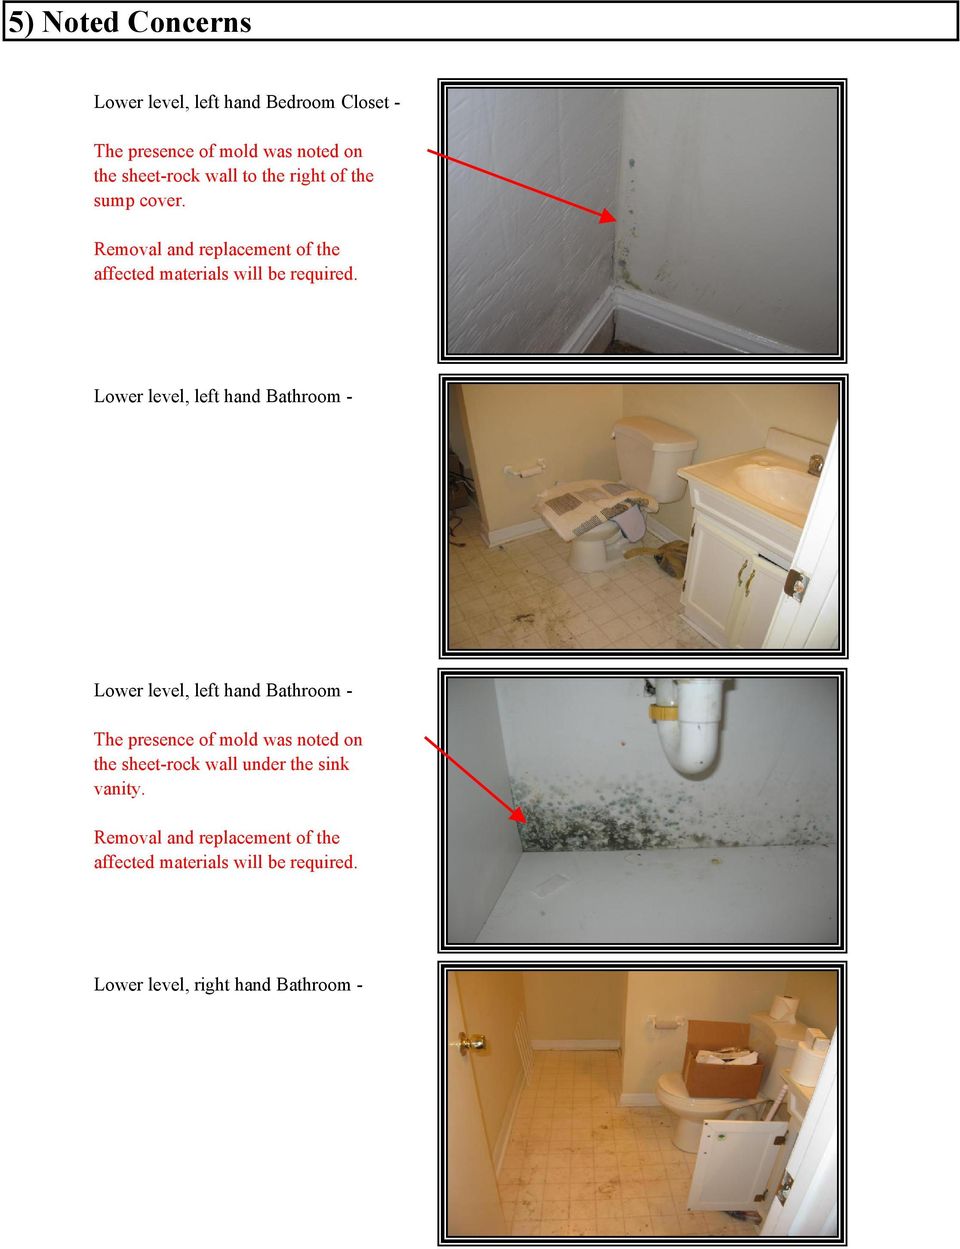 Lower level, left hand Bathroom - Lower level, left hand Bathroom - The presence of mold was noted on the